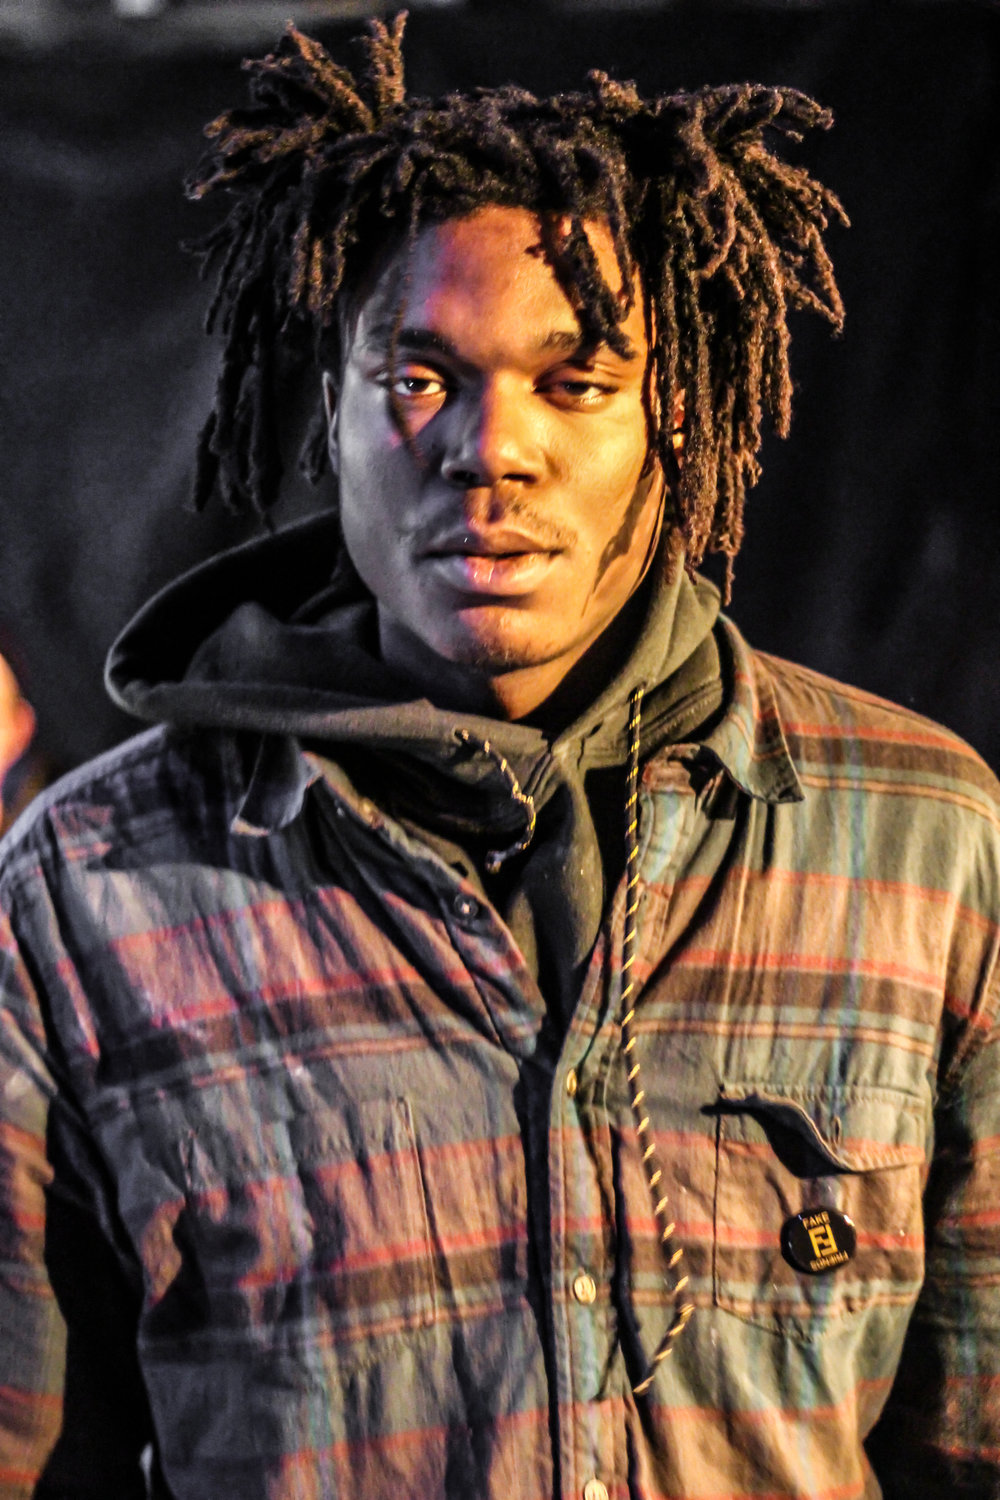 Book LUCKI on BeatGig · Thousands of Artists at Your Fingertips